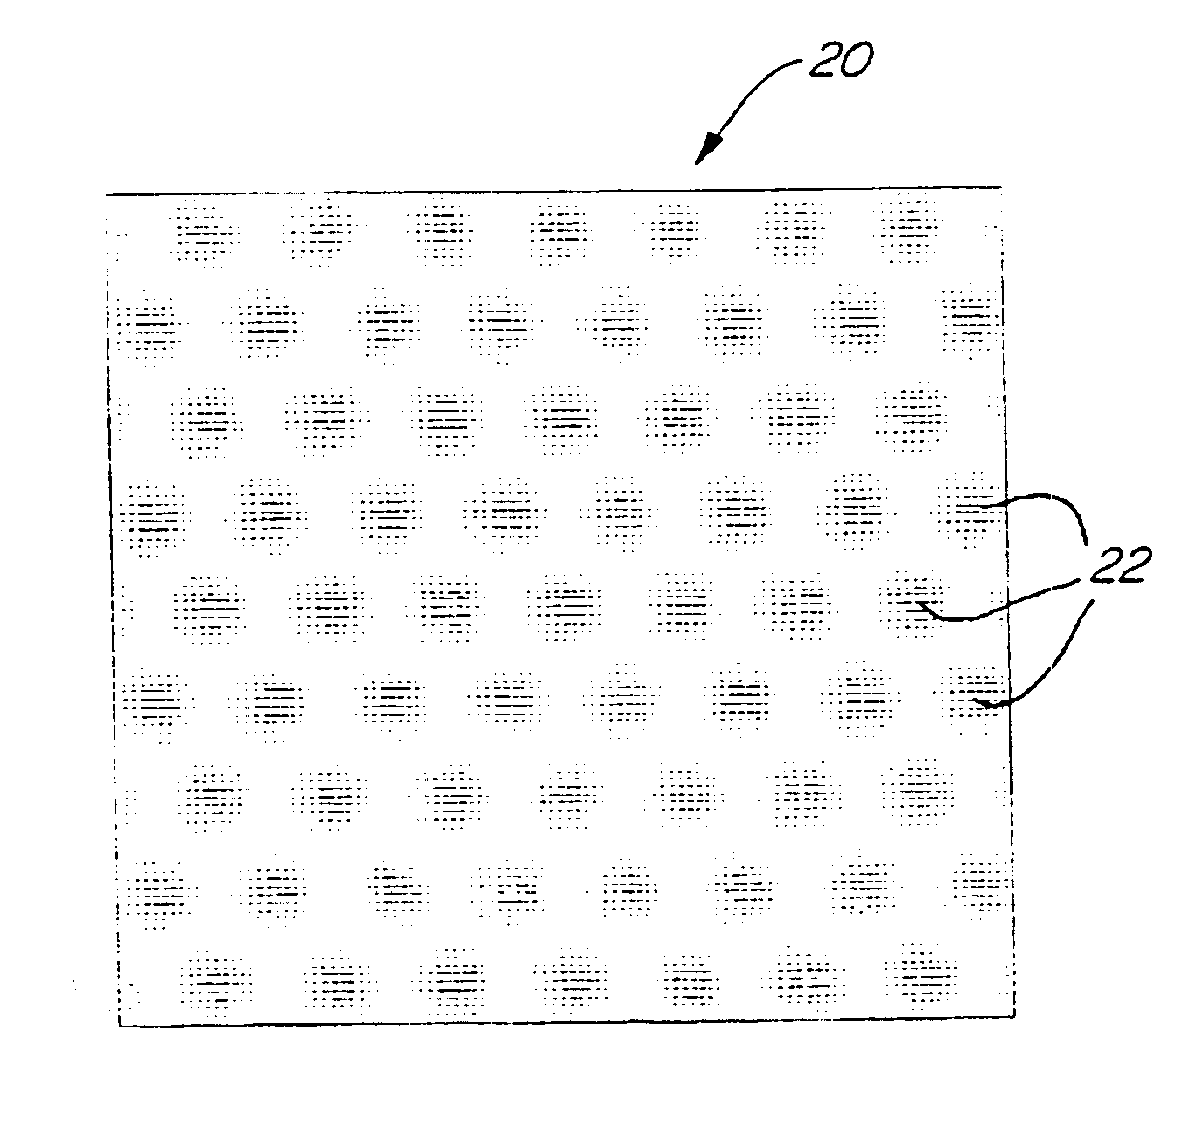 Apparatus and method for fabrication of photonic crystals